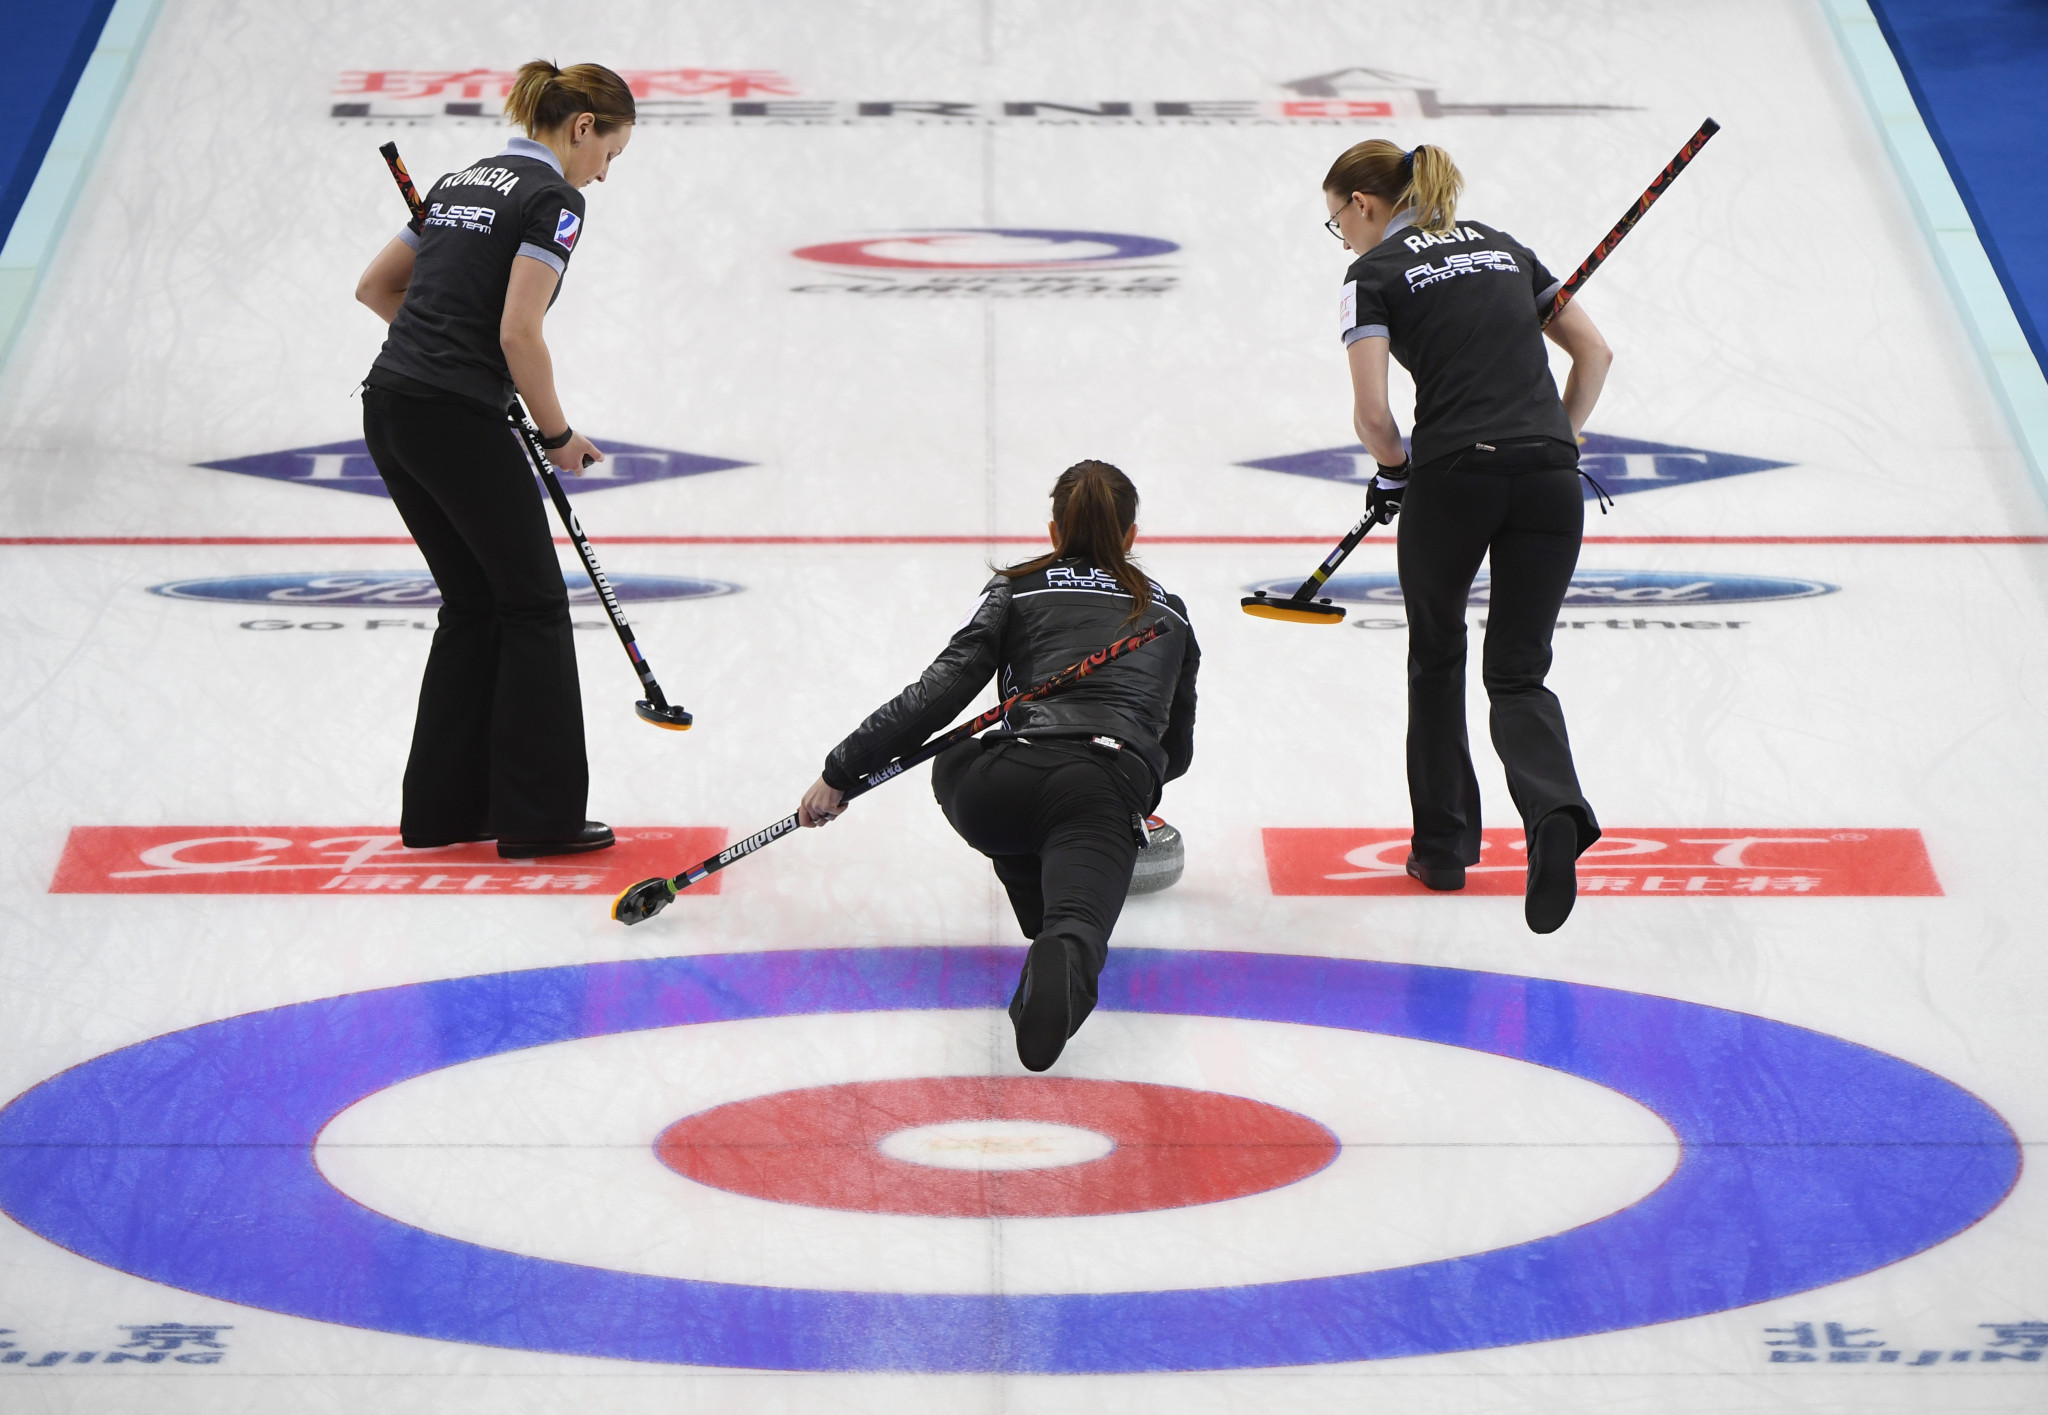 The Russian Curling Federation have suggested they may be able to host events to help keep the Curling World Cup series going after the WCF were forced to announce yesterday they were suspending it ©Getty Images